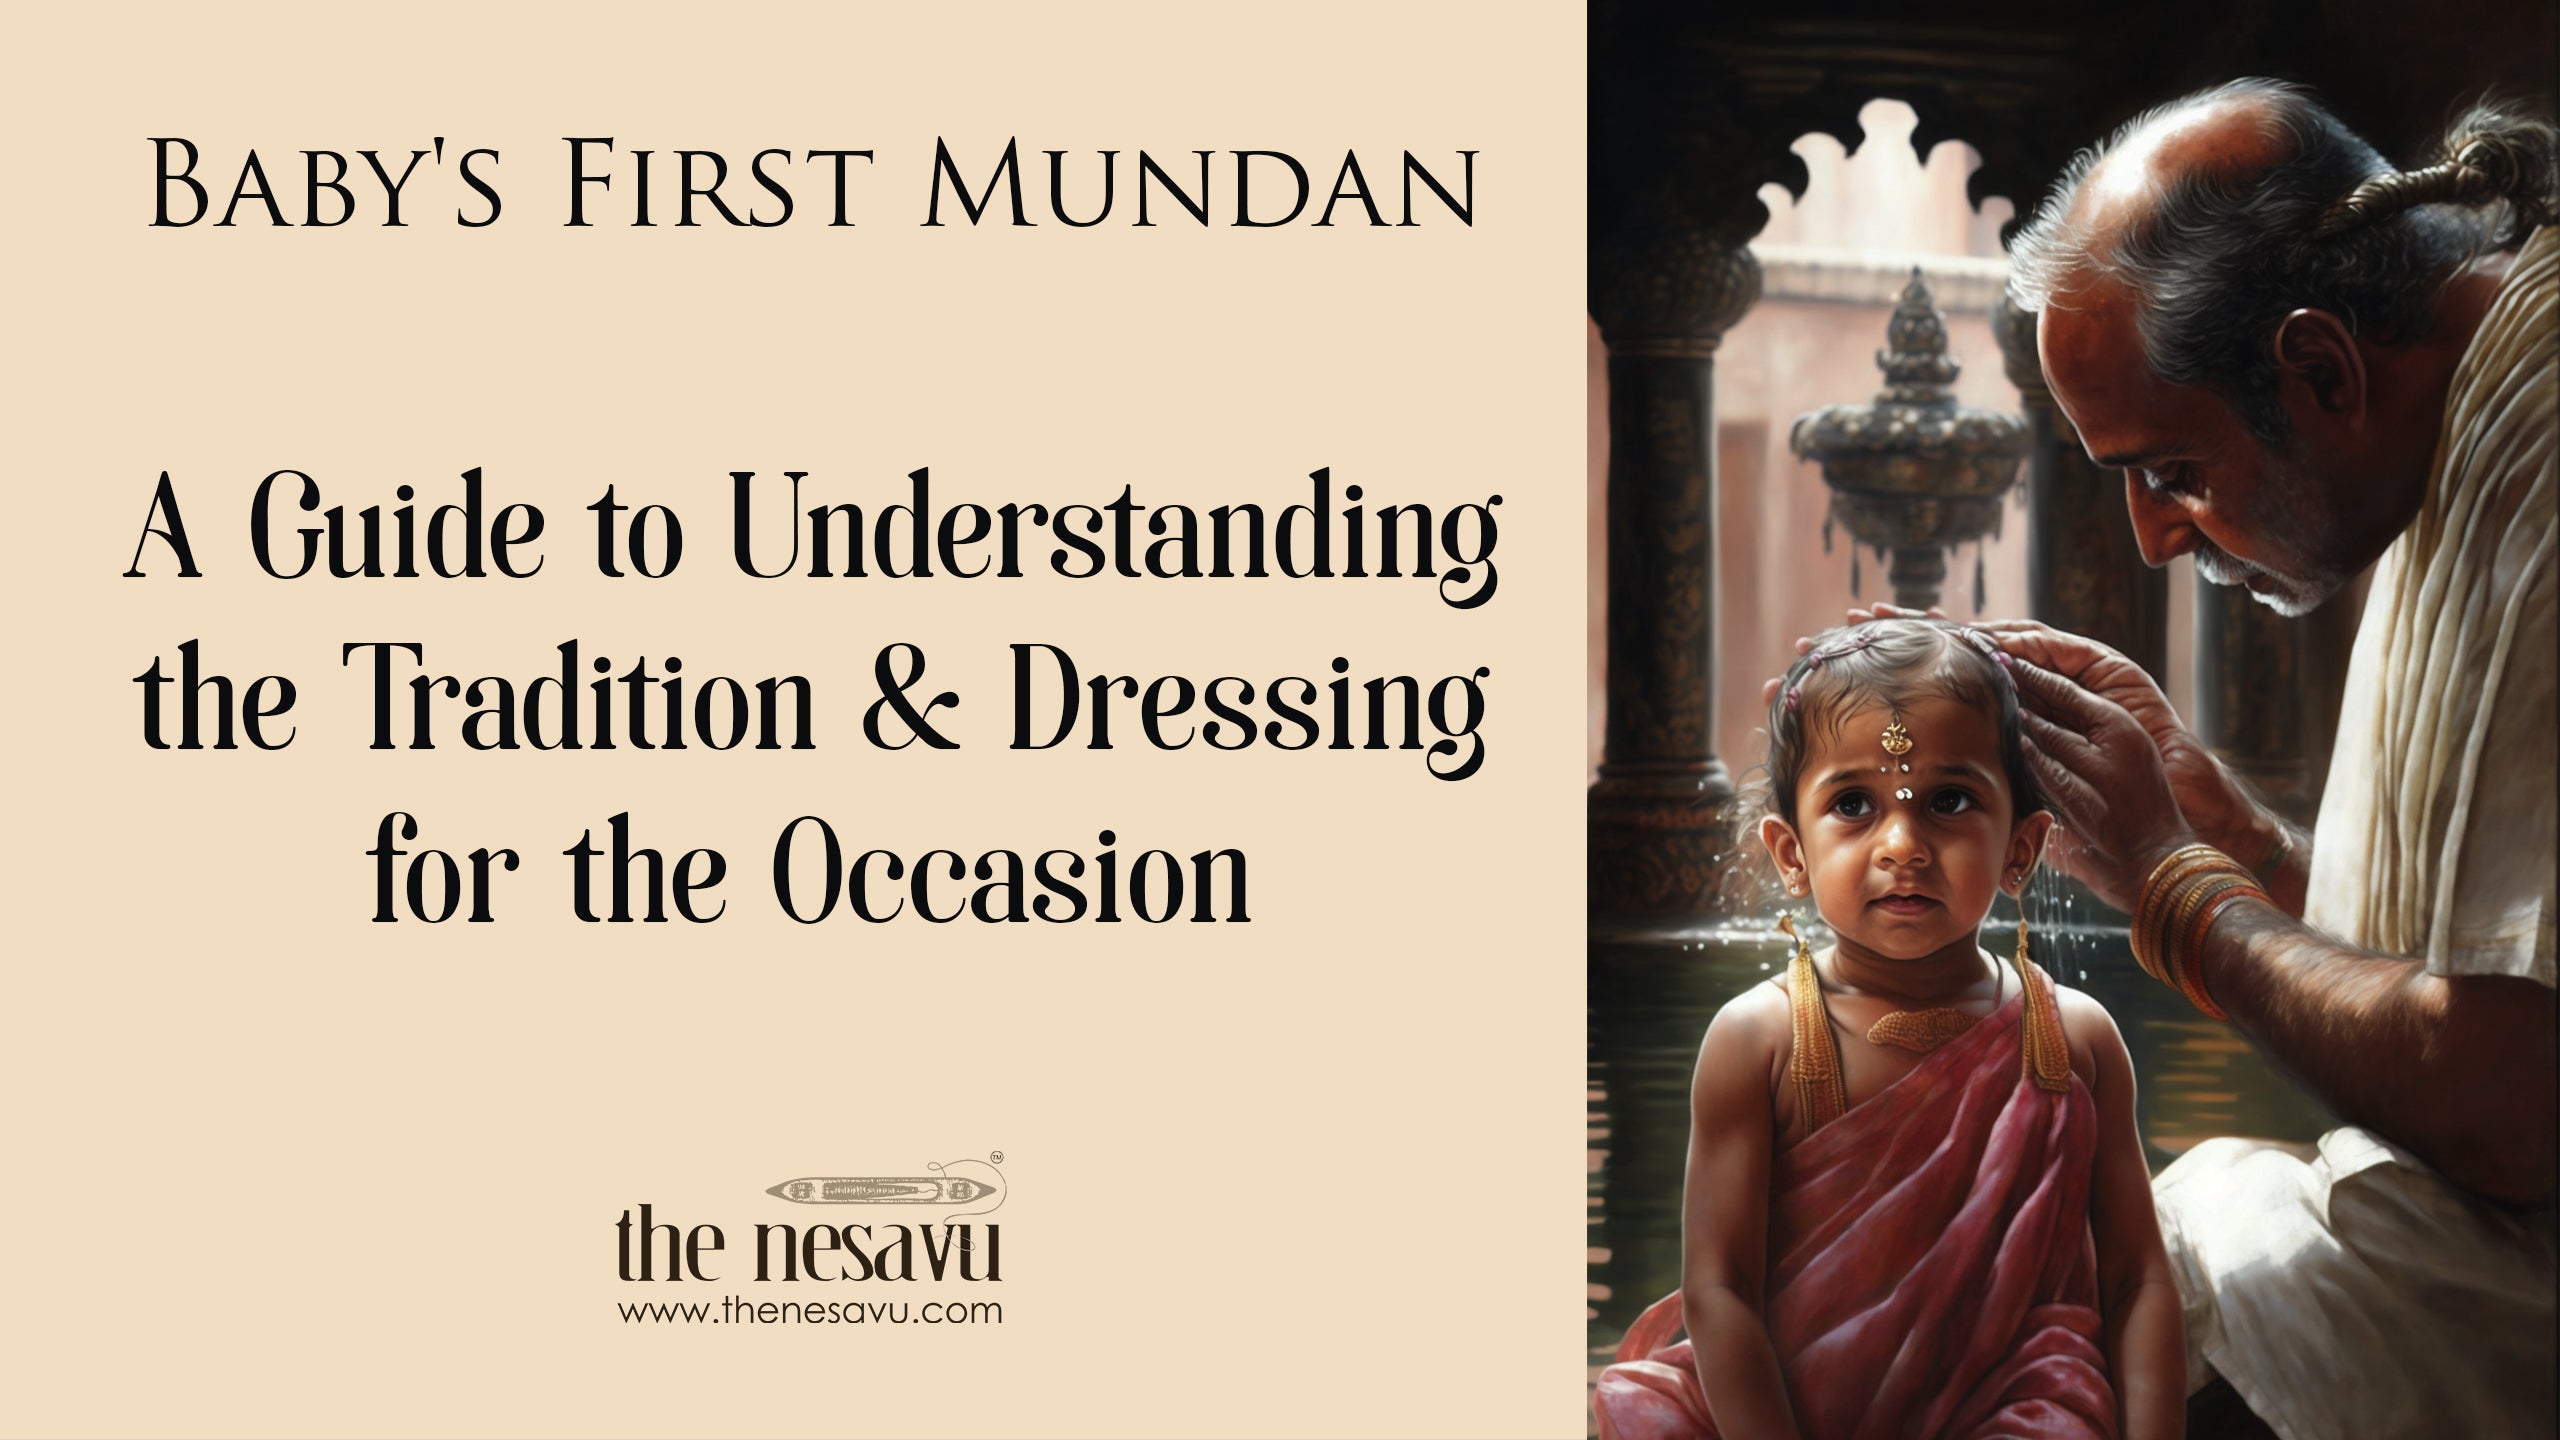 http://www.thenesavu.com/cdn/shop/articles/Baby_s_First_Mundan-_A_Guide_to_Understanding_the_Tradition_Dressing_for_the_Occasion_FB90.jpg?v=1683006581